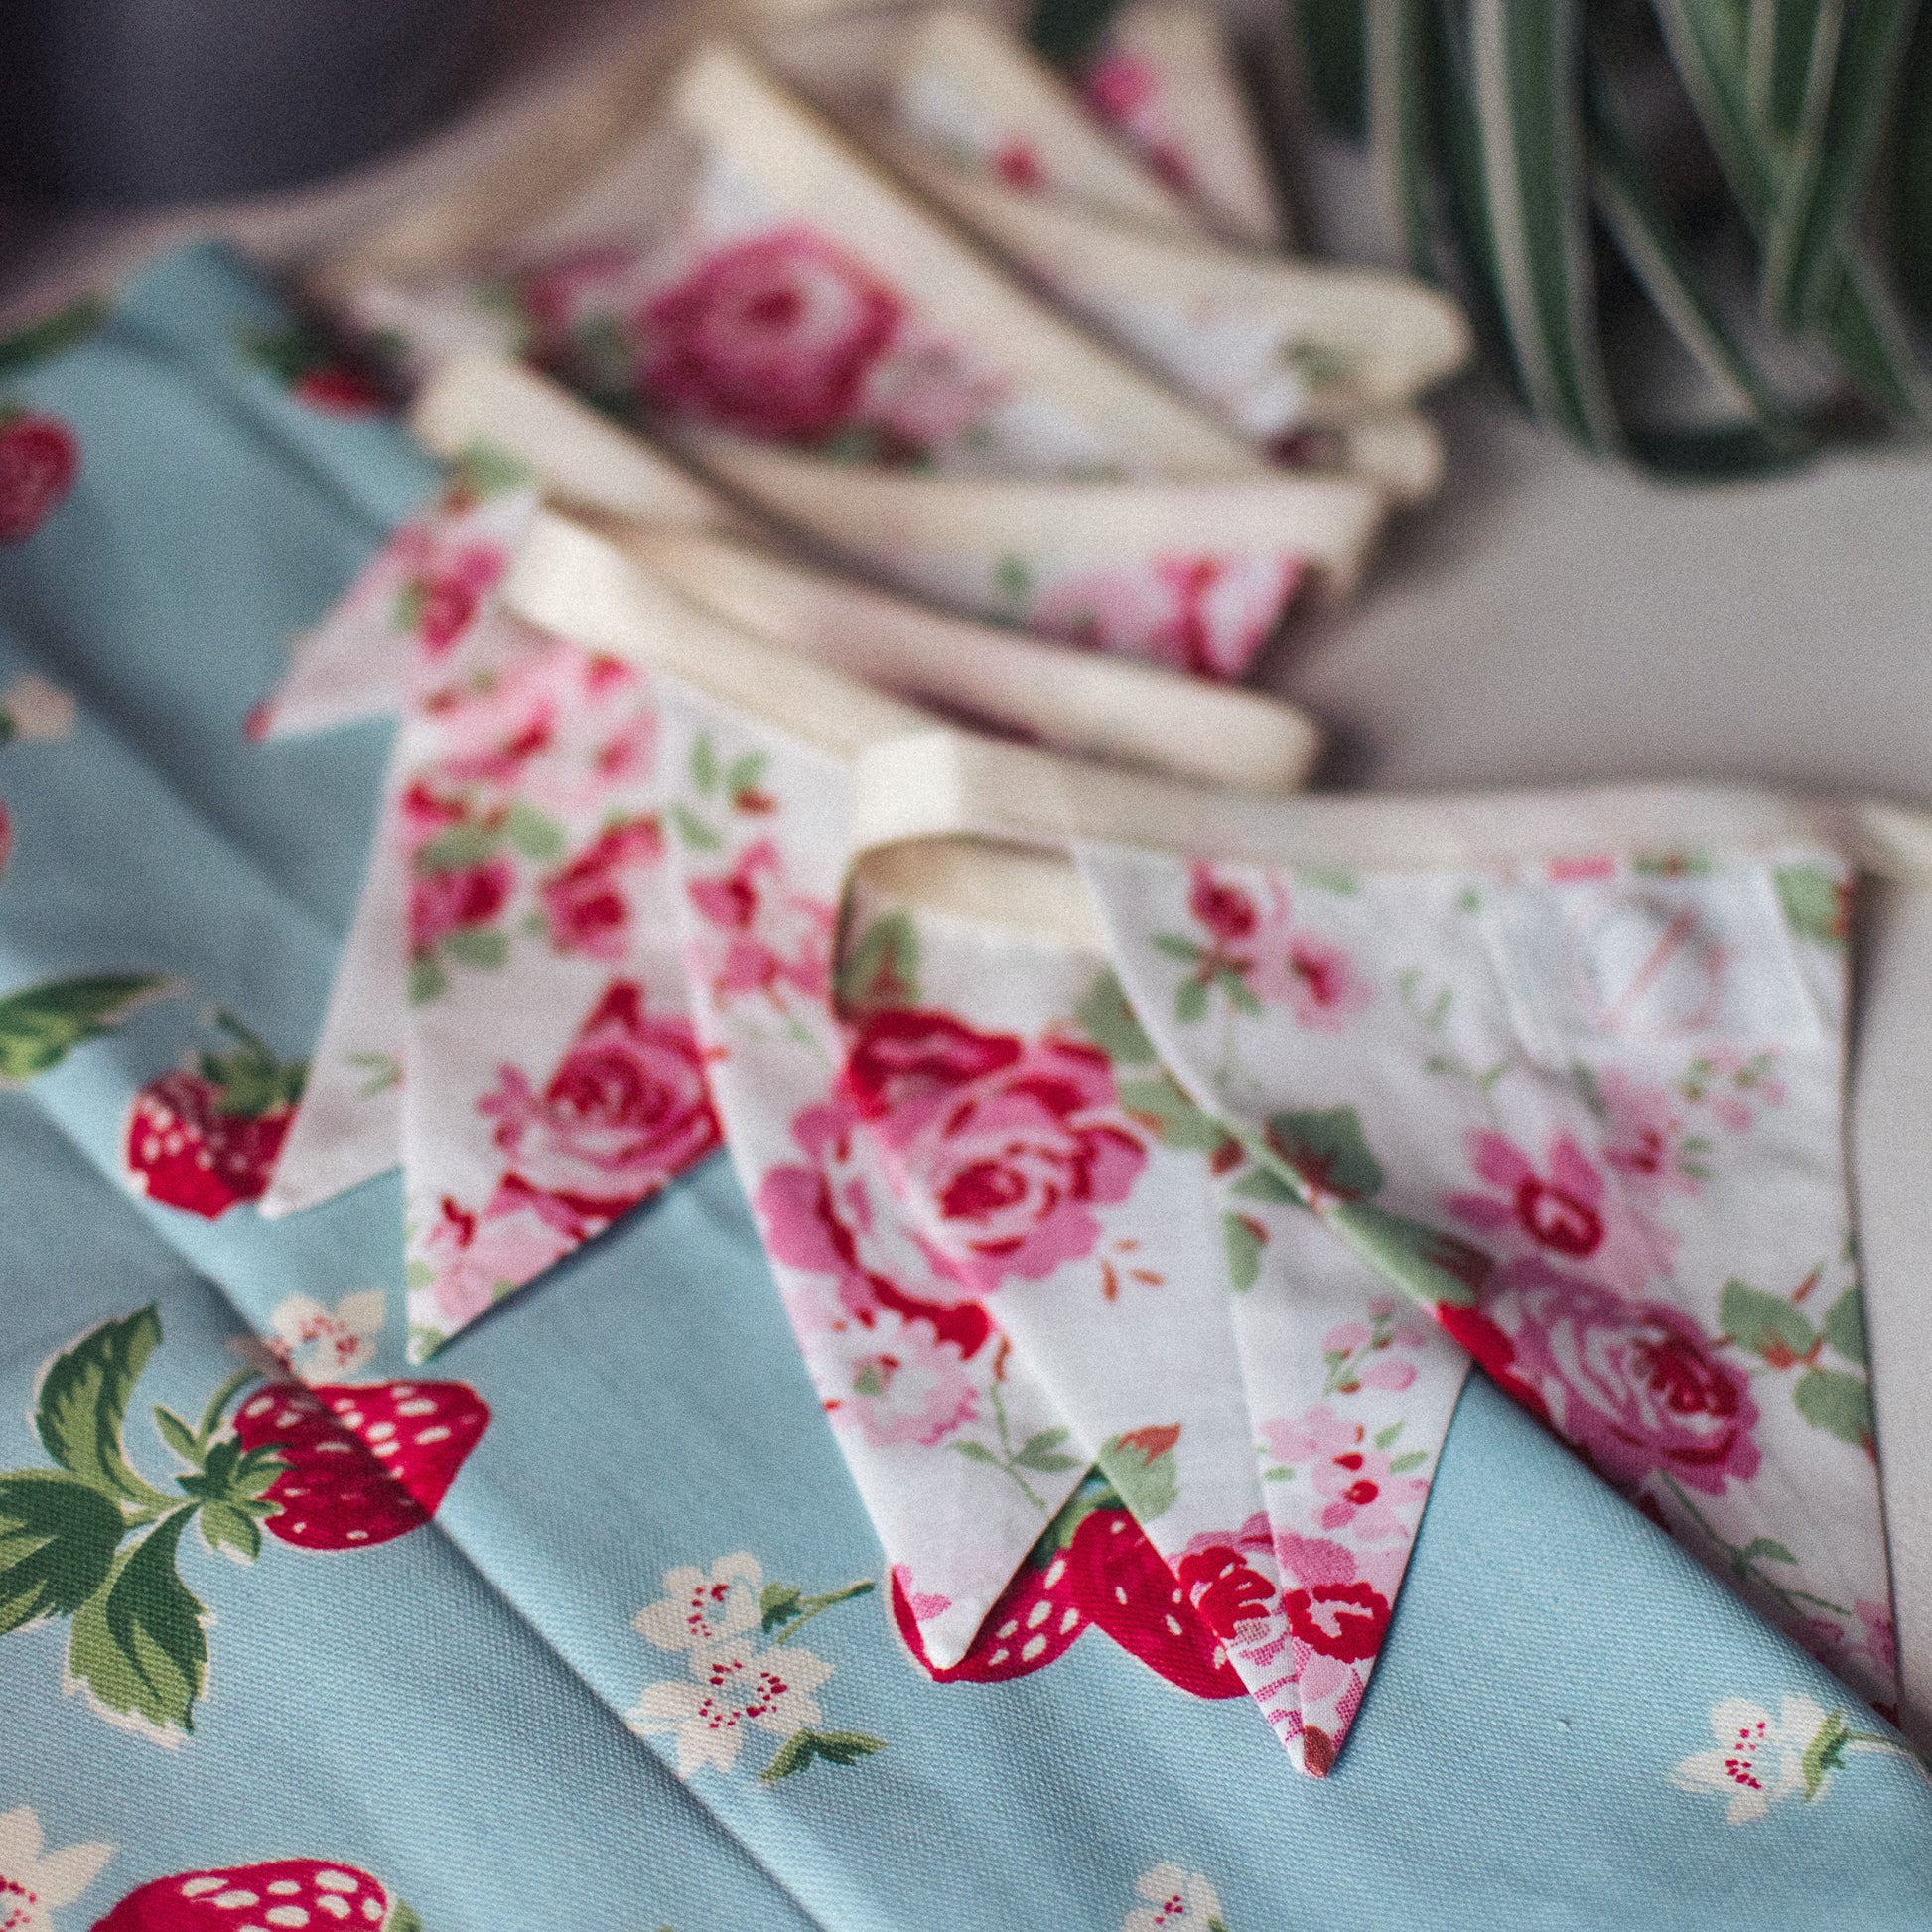 Rosali Vintage Style Cath Kidston Bunting - Against a vibrant strawberry print, showcasing its reversible design and elegance